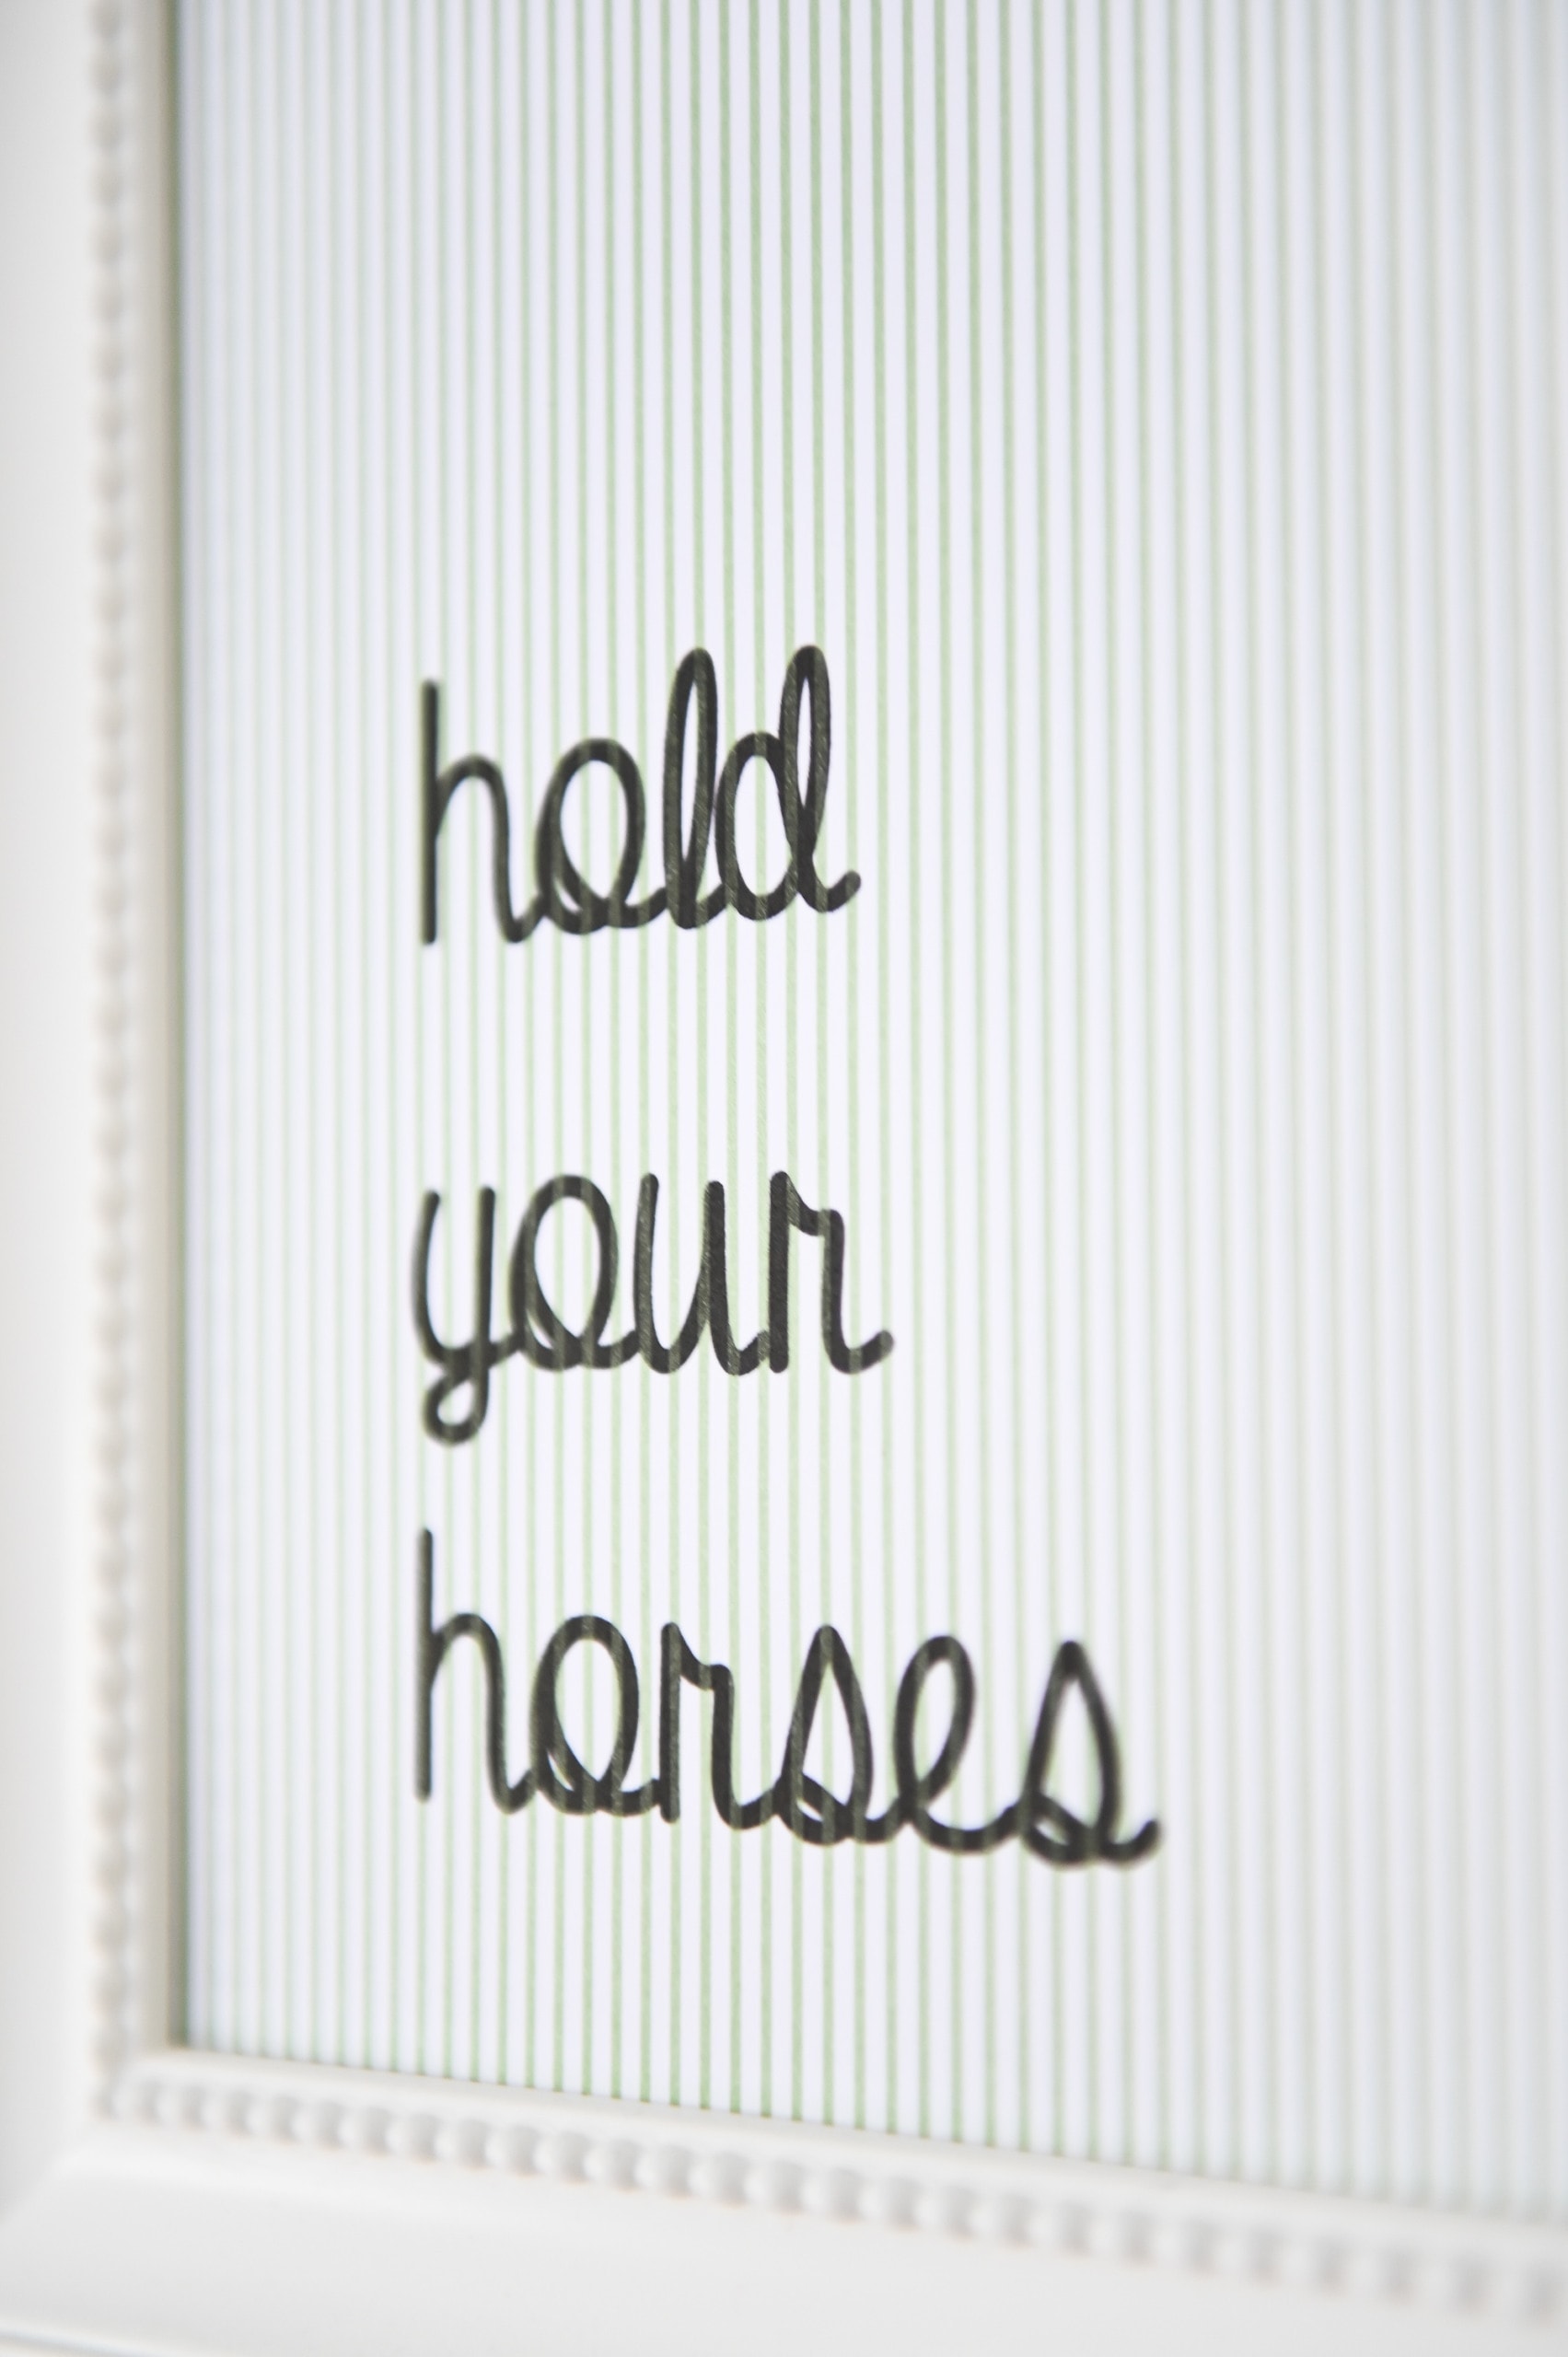 Hold your horses art print